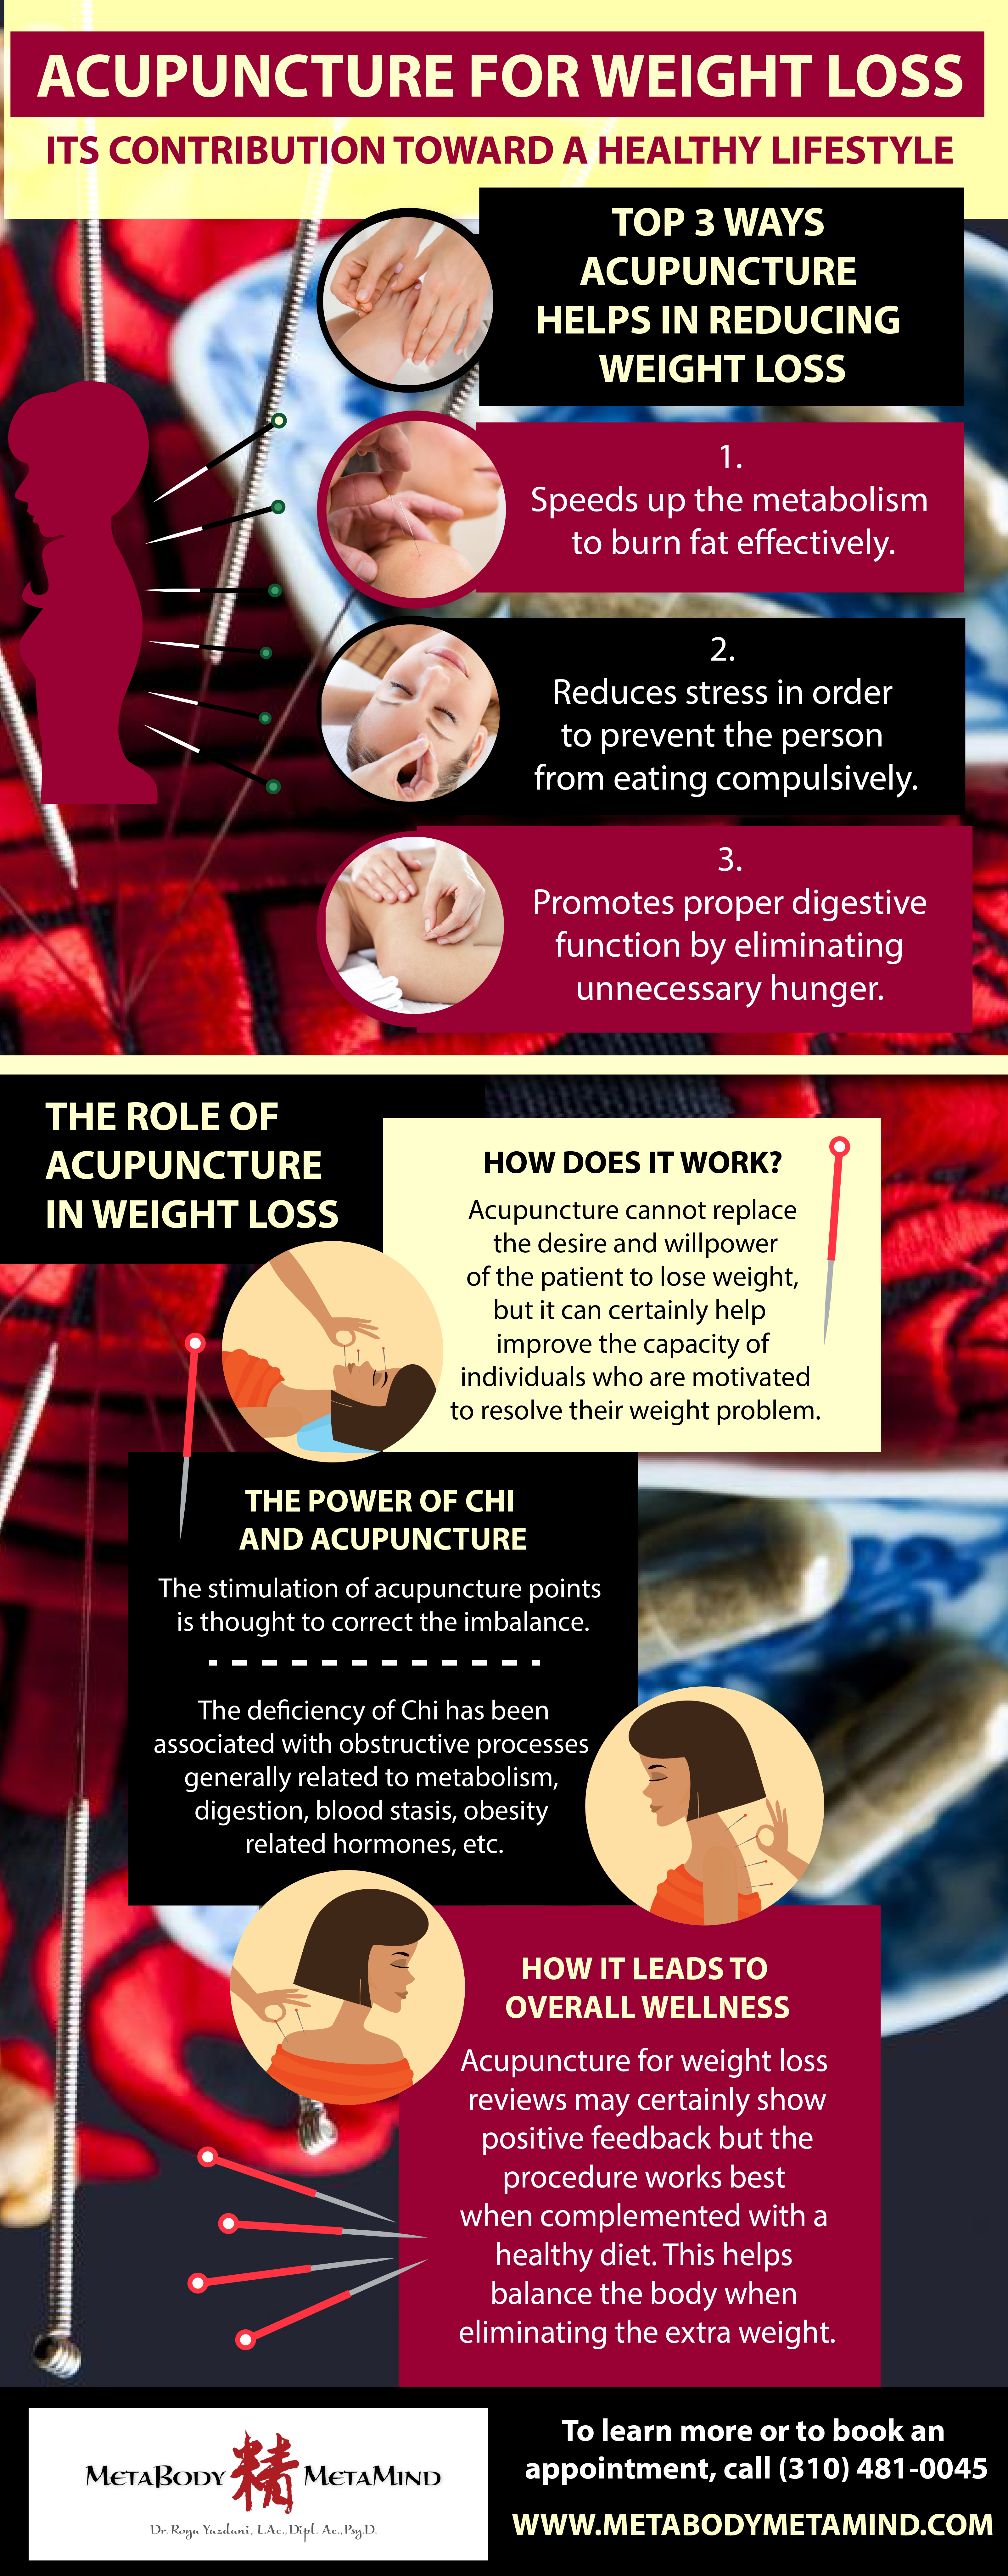 Top 3 Ways Acupuncture Helps In Reducing Weight Loss